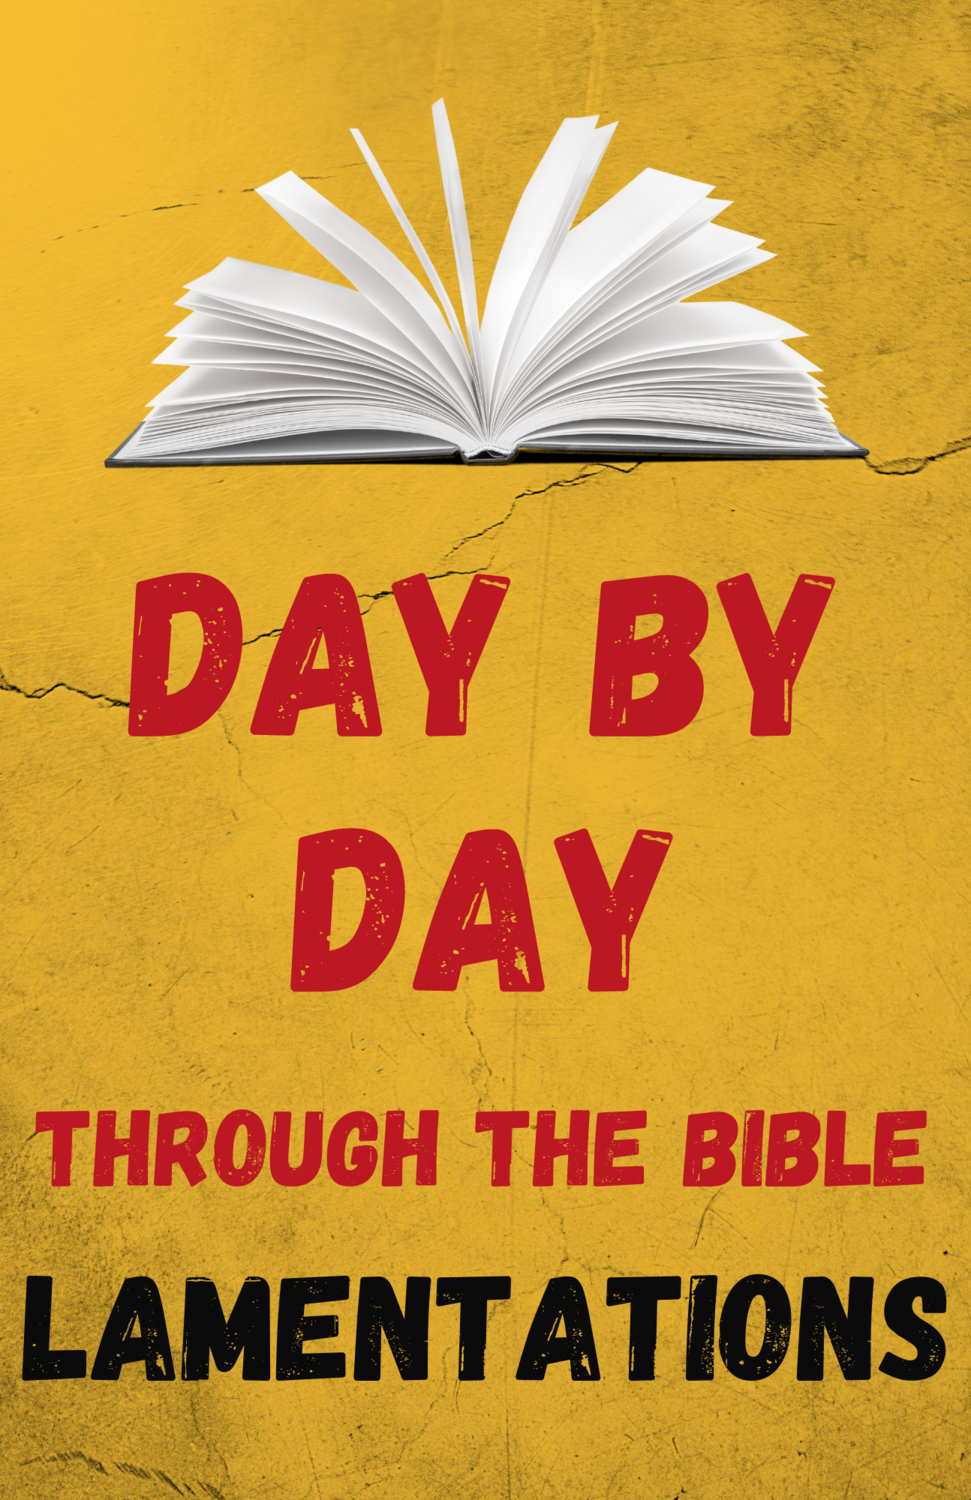 Day by Day Through the Bible: Five Days in Lamentations - Digital Download